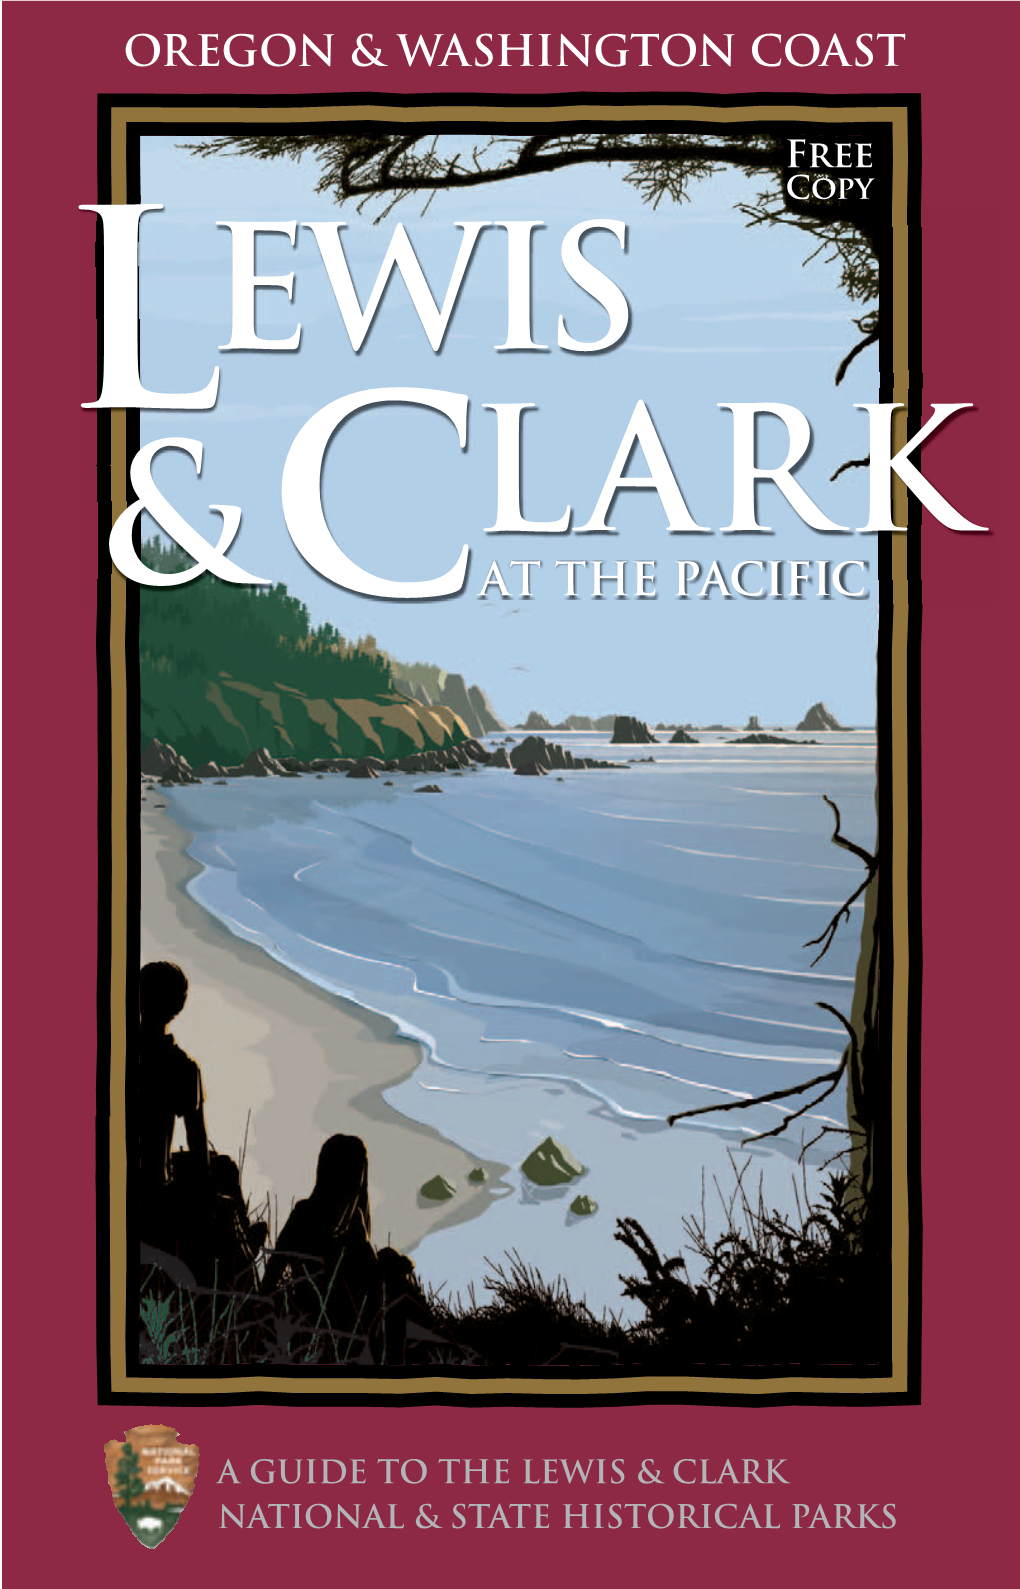 Guide to the Lewis & Clark National & State Historical Parks